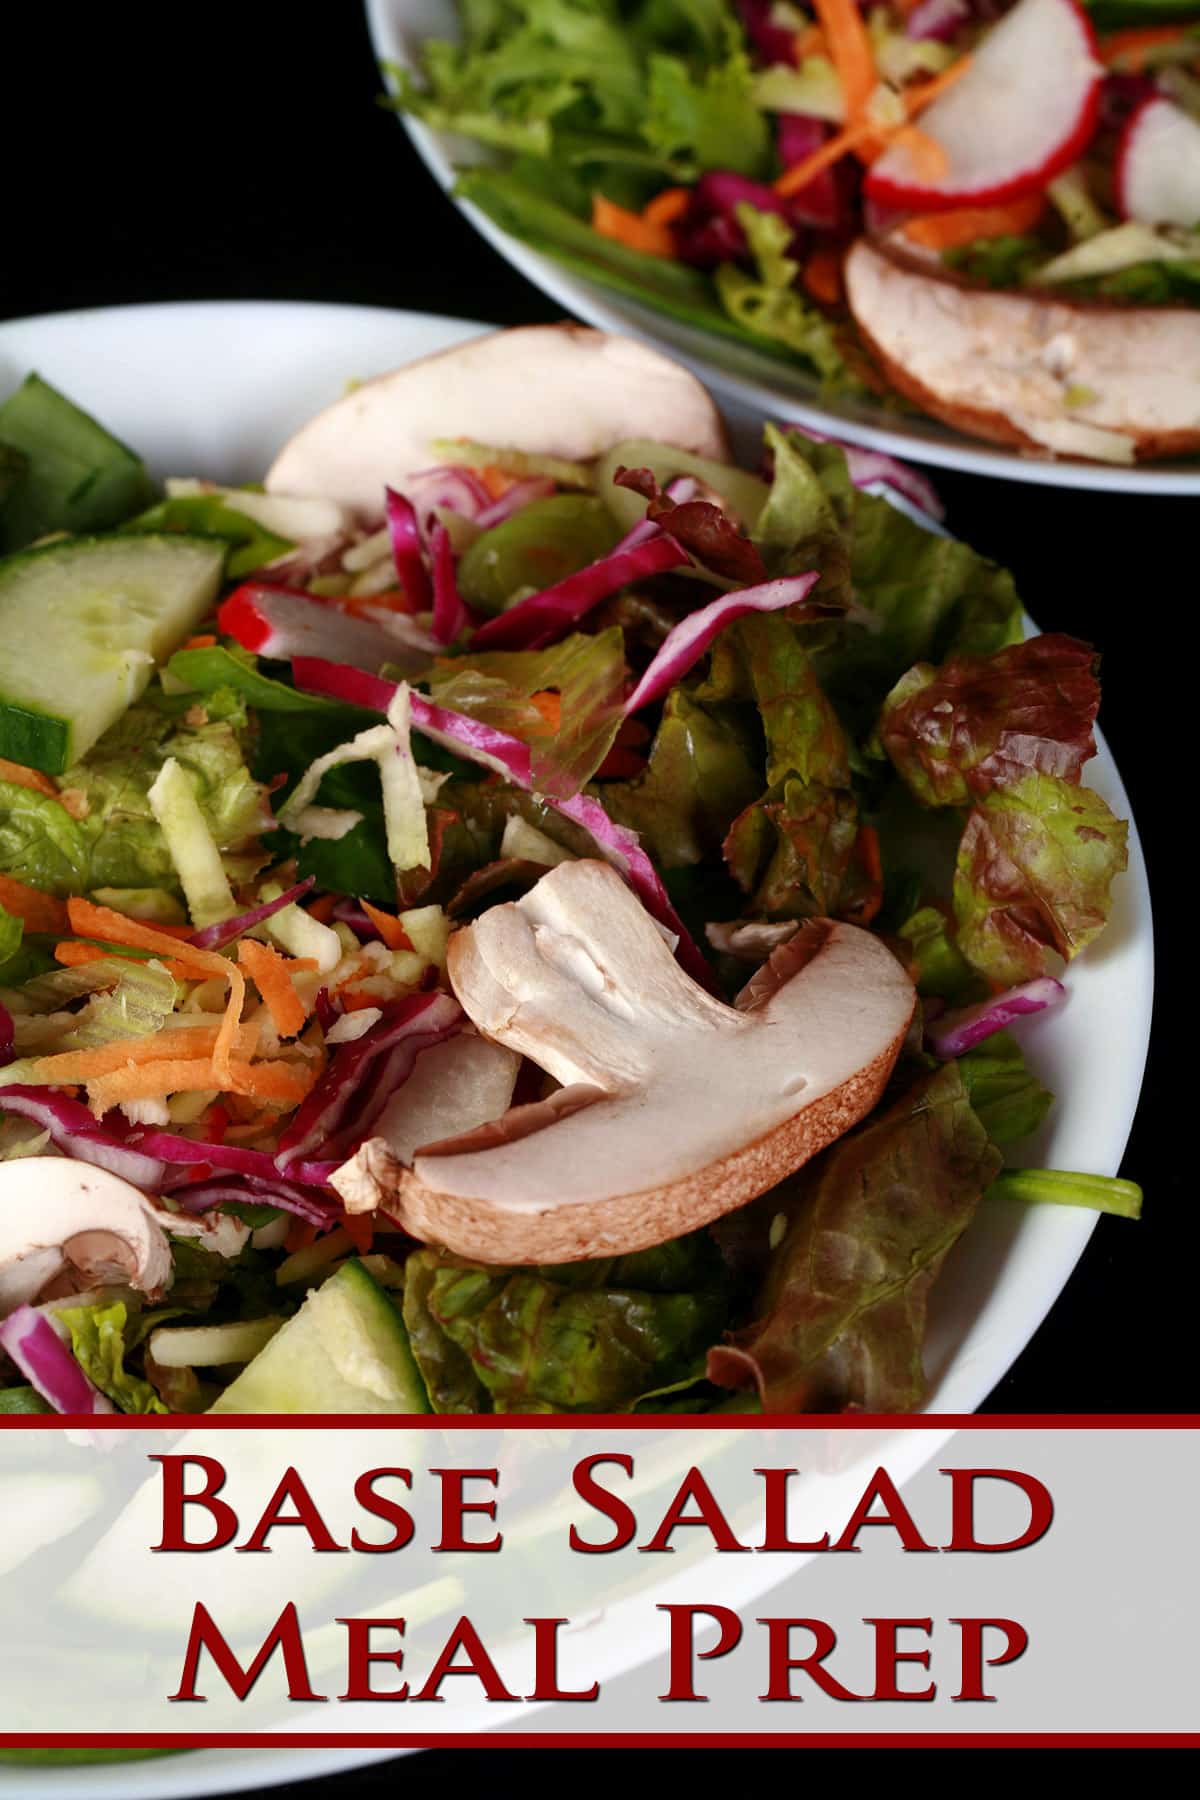 A bowl of base salad, with lettuce, mushrooms, radishes, cucumbers, etc visible.